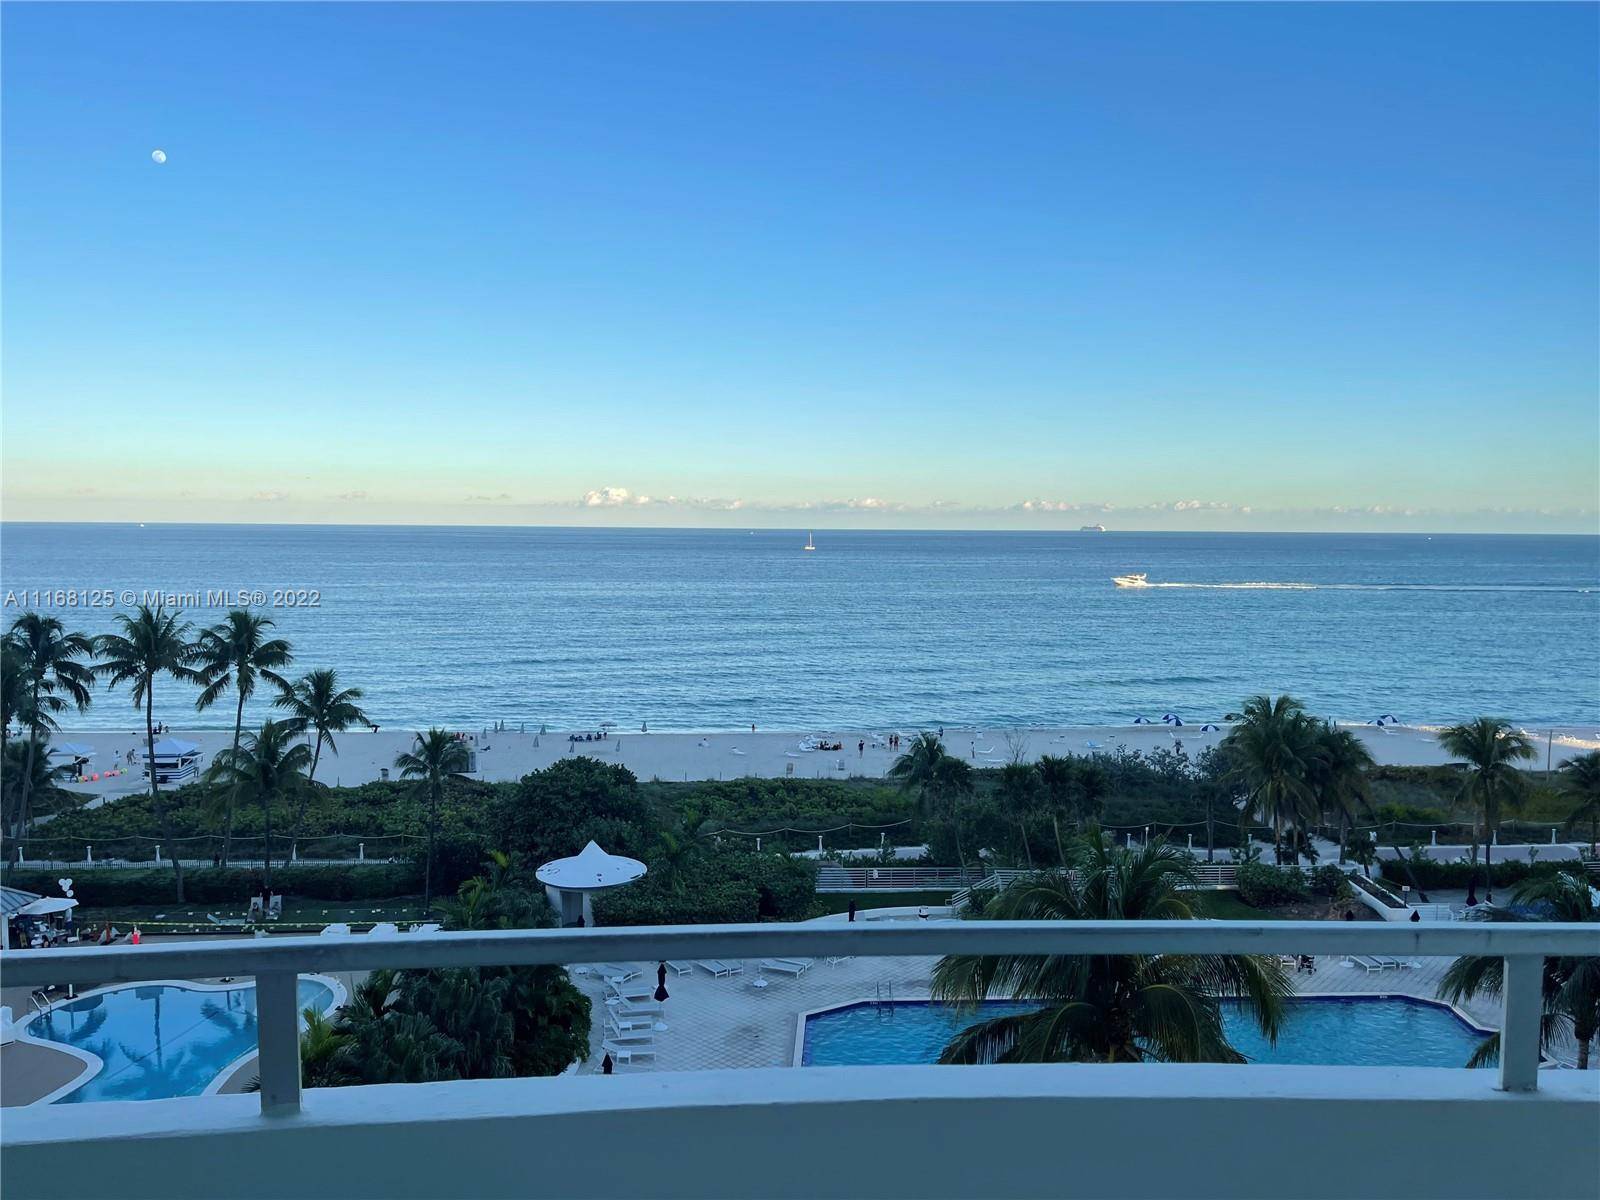 DIRECT EAST OCEANFRONT CONDOMINIUM WITH A WRAP AROUND BALCONY KNOWN AS ROTUNDA HAS OCEAN VIEWS FROM EVERY WINDOW, THE BUILDING IS A RESORT STYLE CONDOMINIUM WITH MANY AMENITIES LIKE A ...